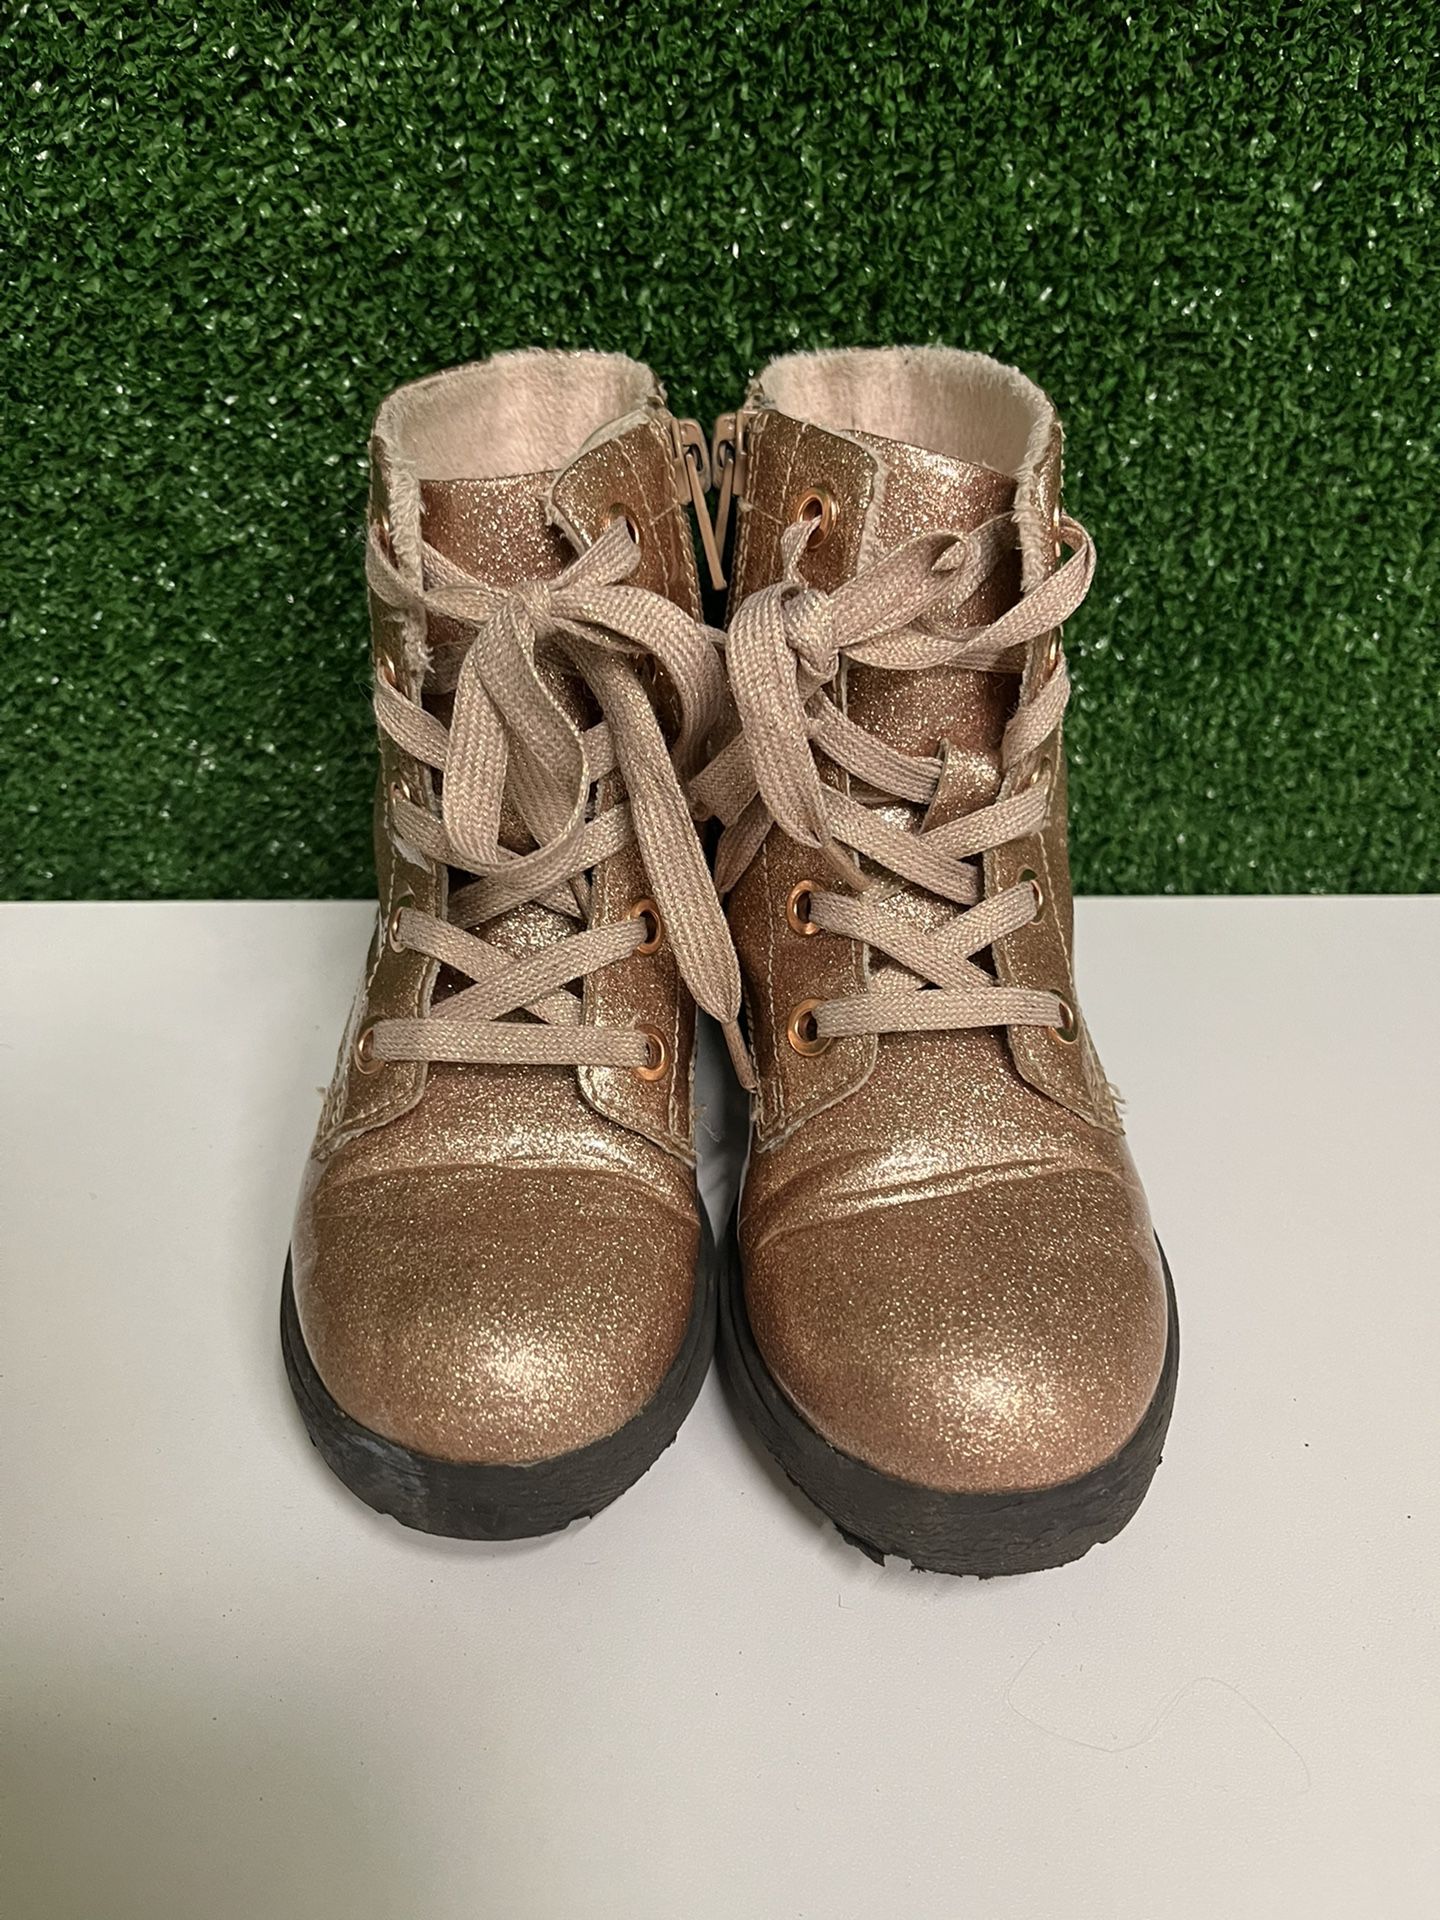 H&M Pink Sparkle Toddler Boots Size 10.5 